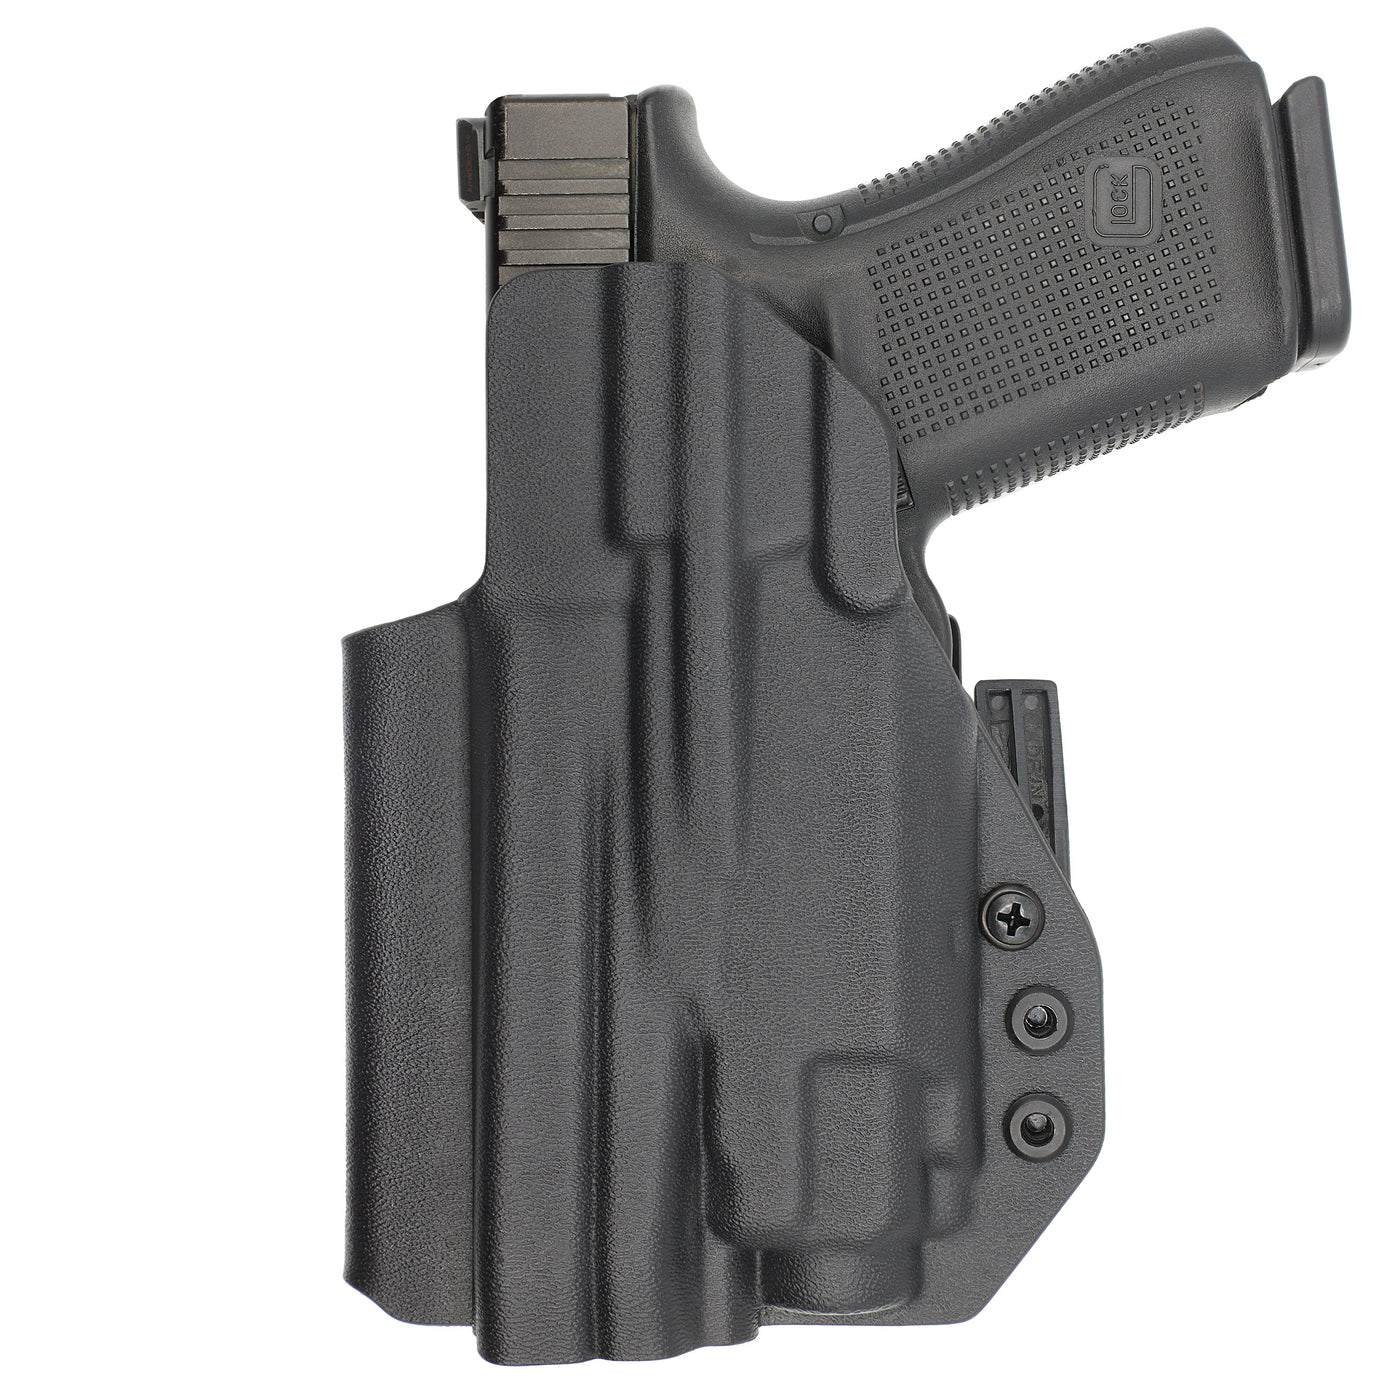 C&G Holsters custom IWB ALPHA UPGRADE Tactical Poly80 streamlight TLR8 holstered back view